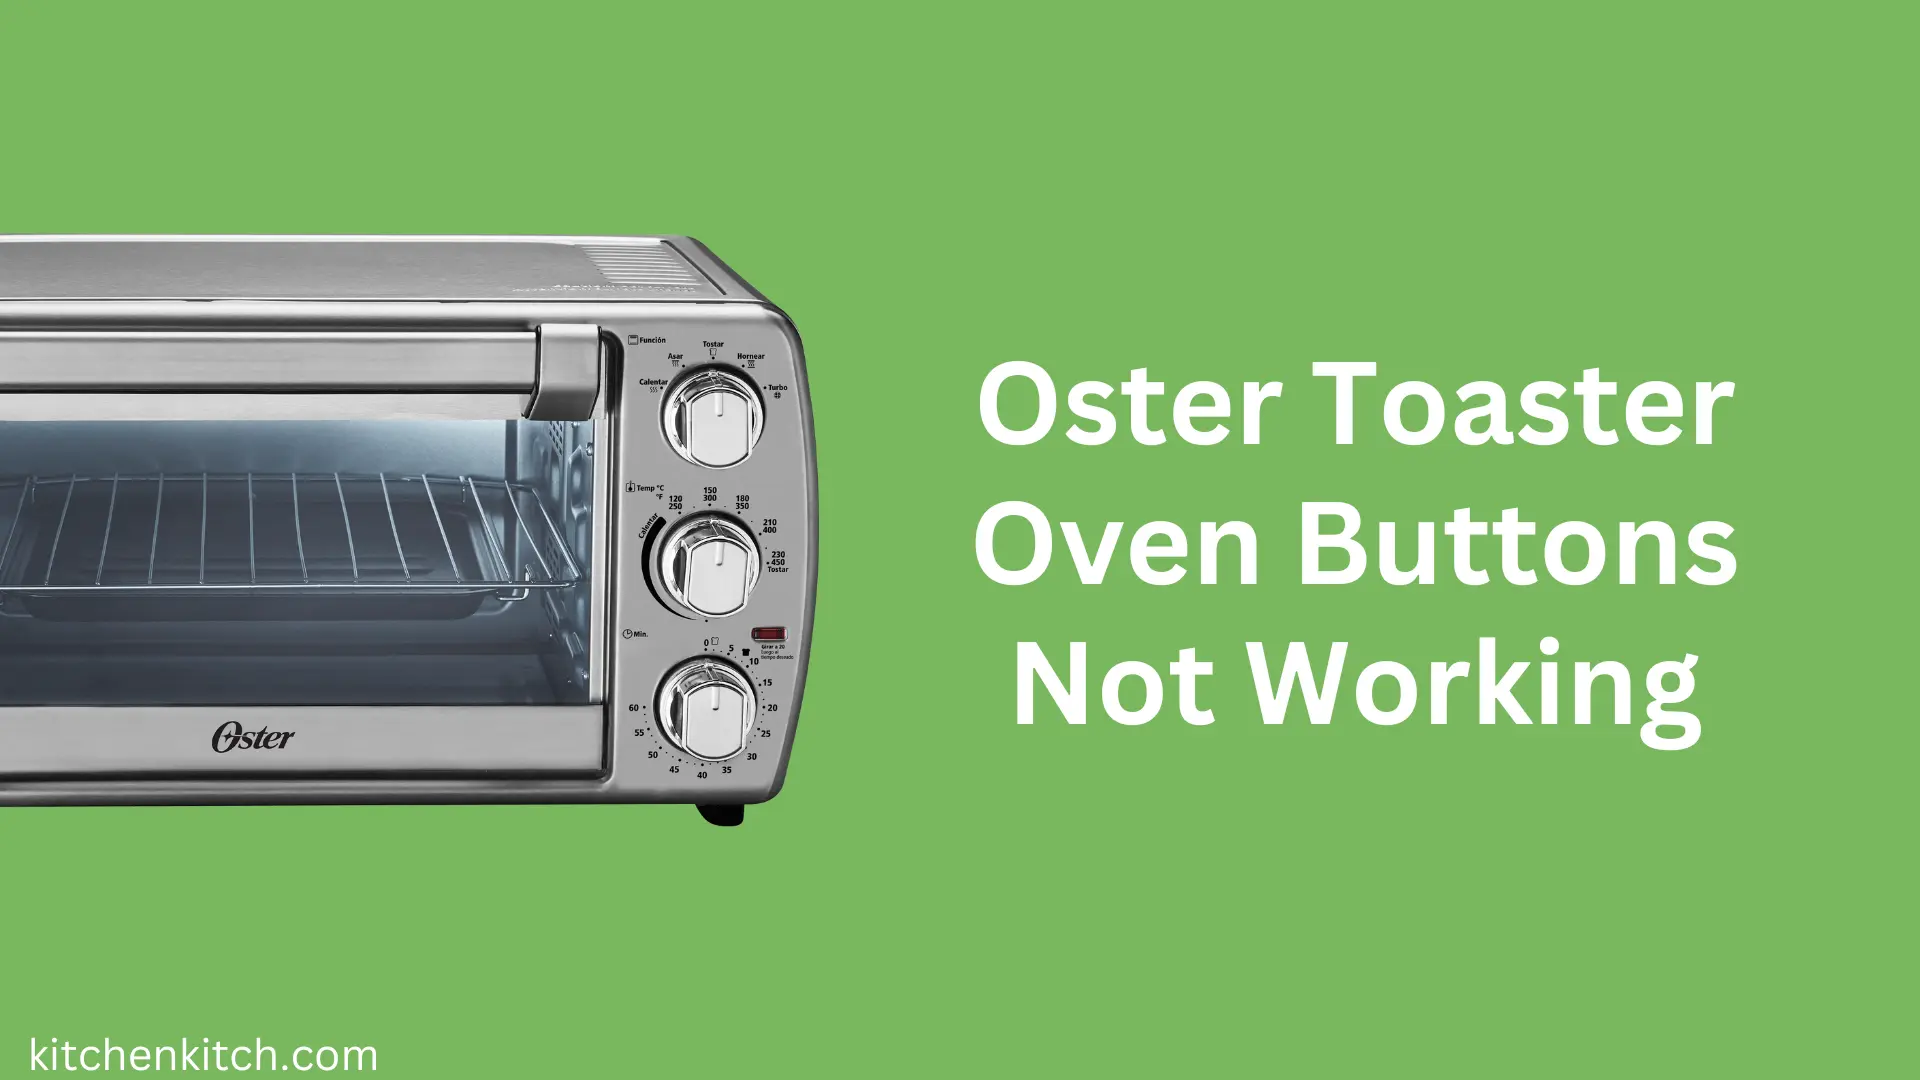 Oster Toaster Oven Buttons Not Working